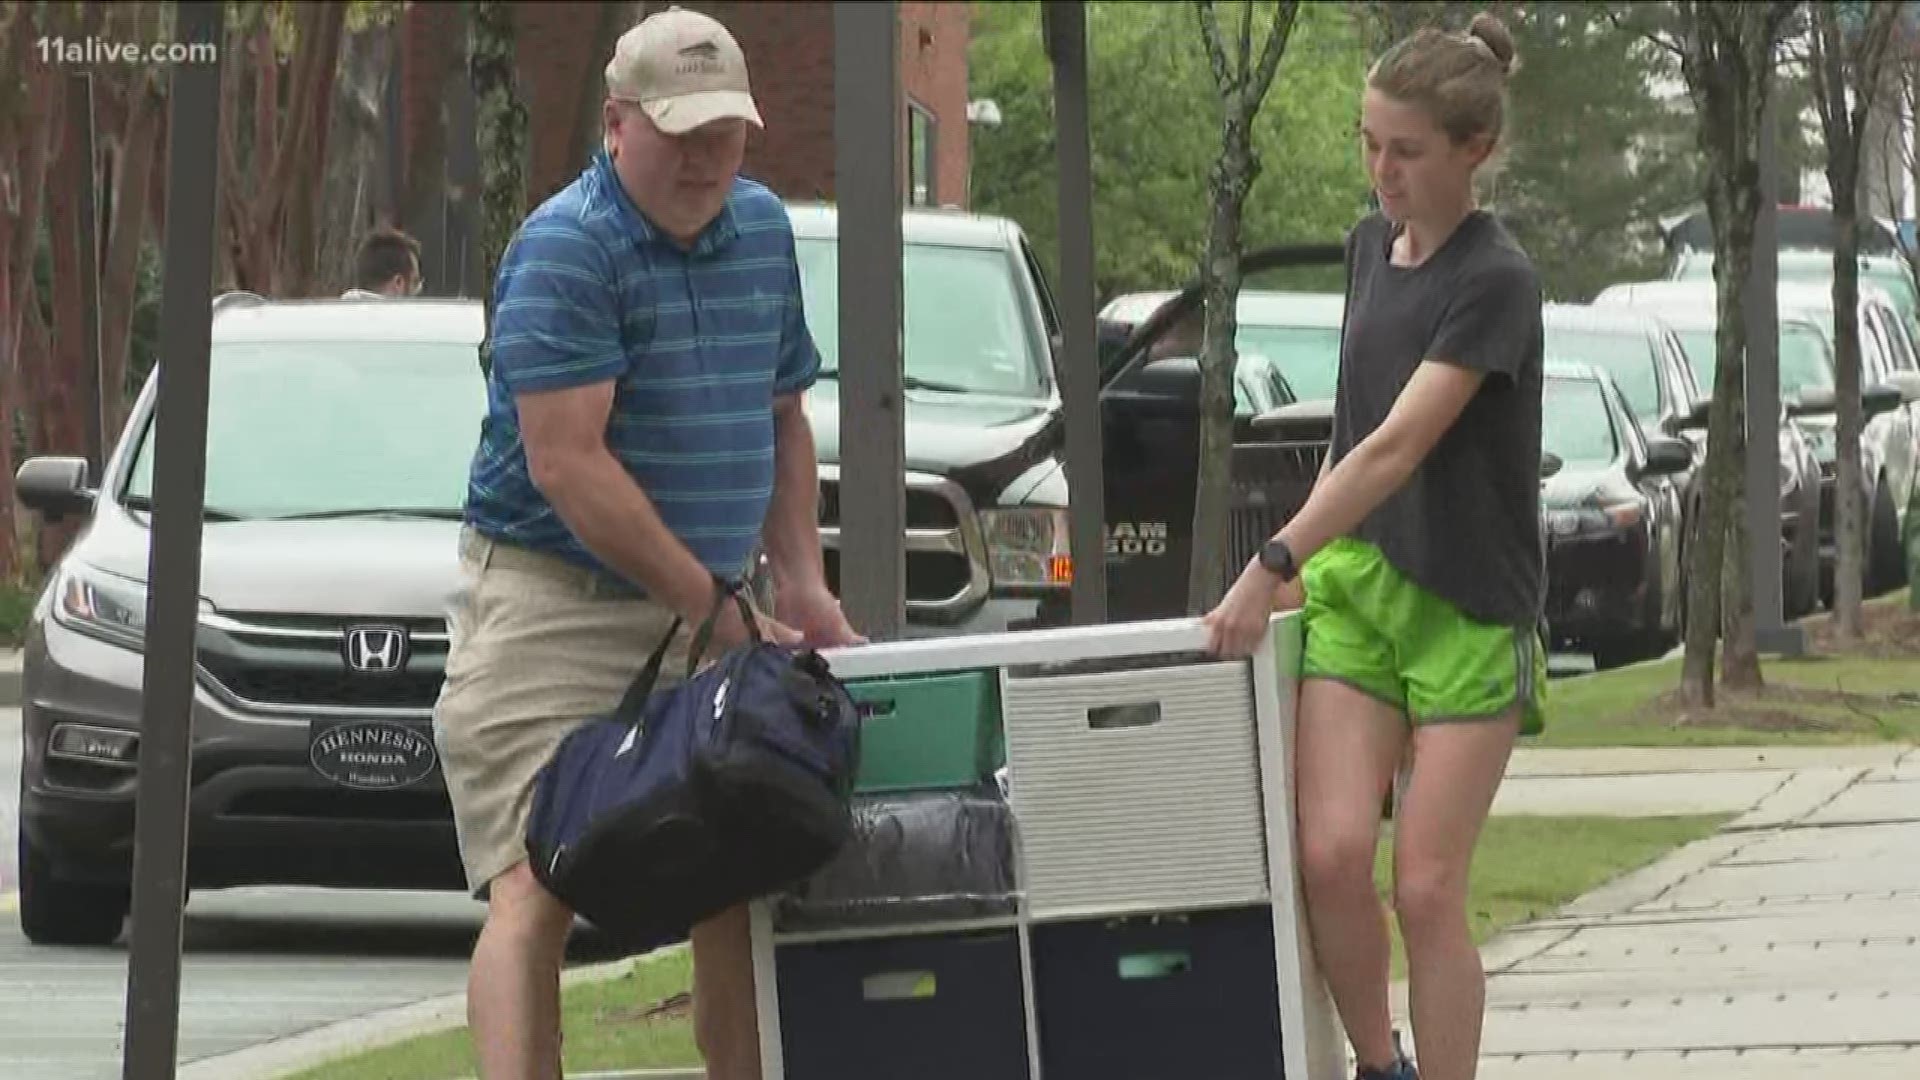 With colleges and universities closing due ot the spread of COVID-19, many schools are using this weekend as move-out weekend to clear out the dorms.